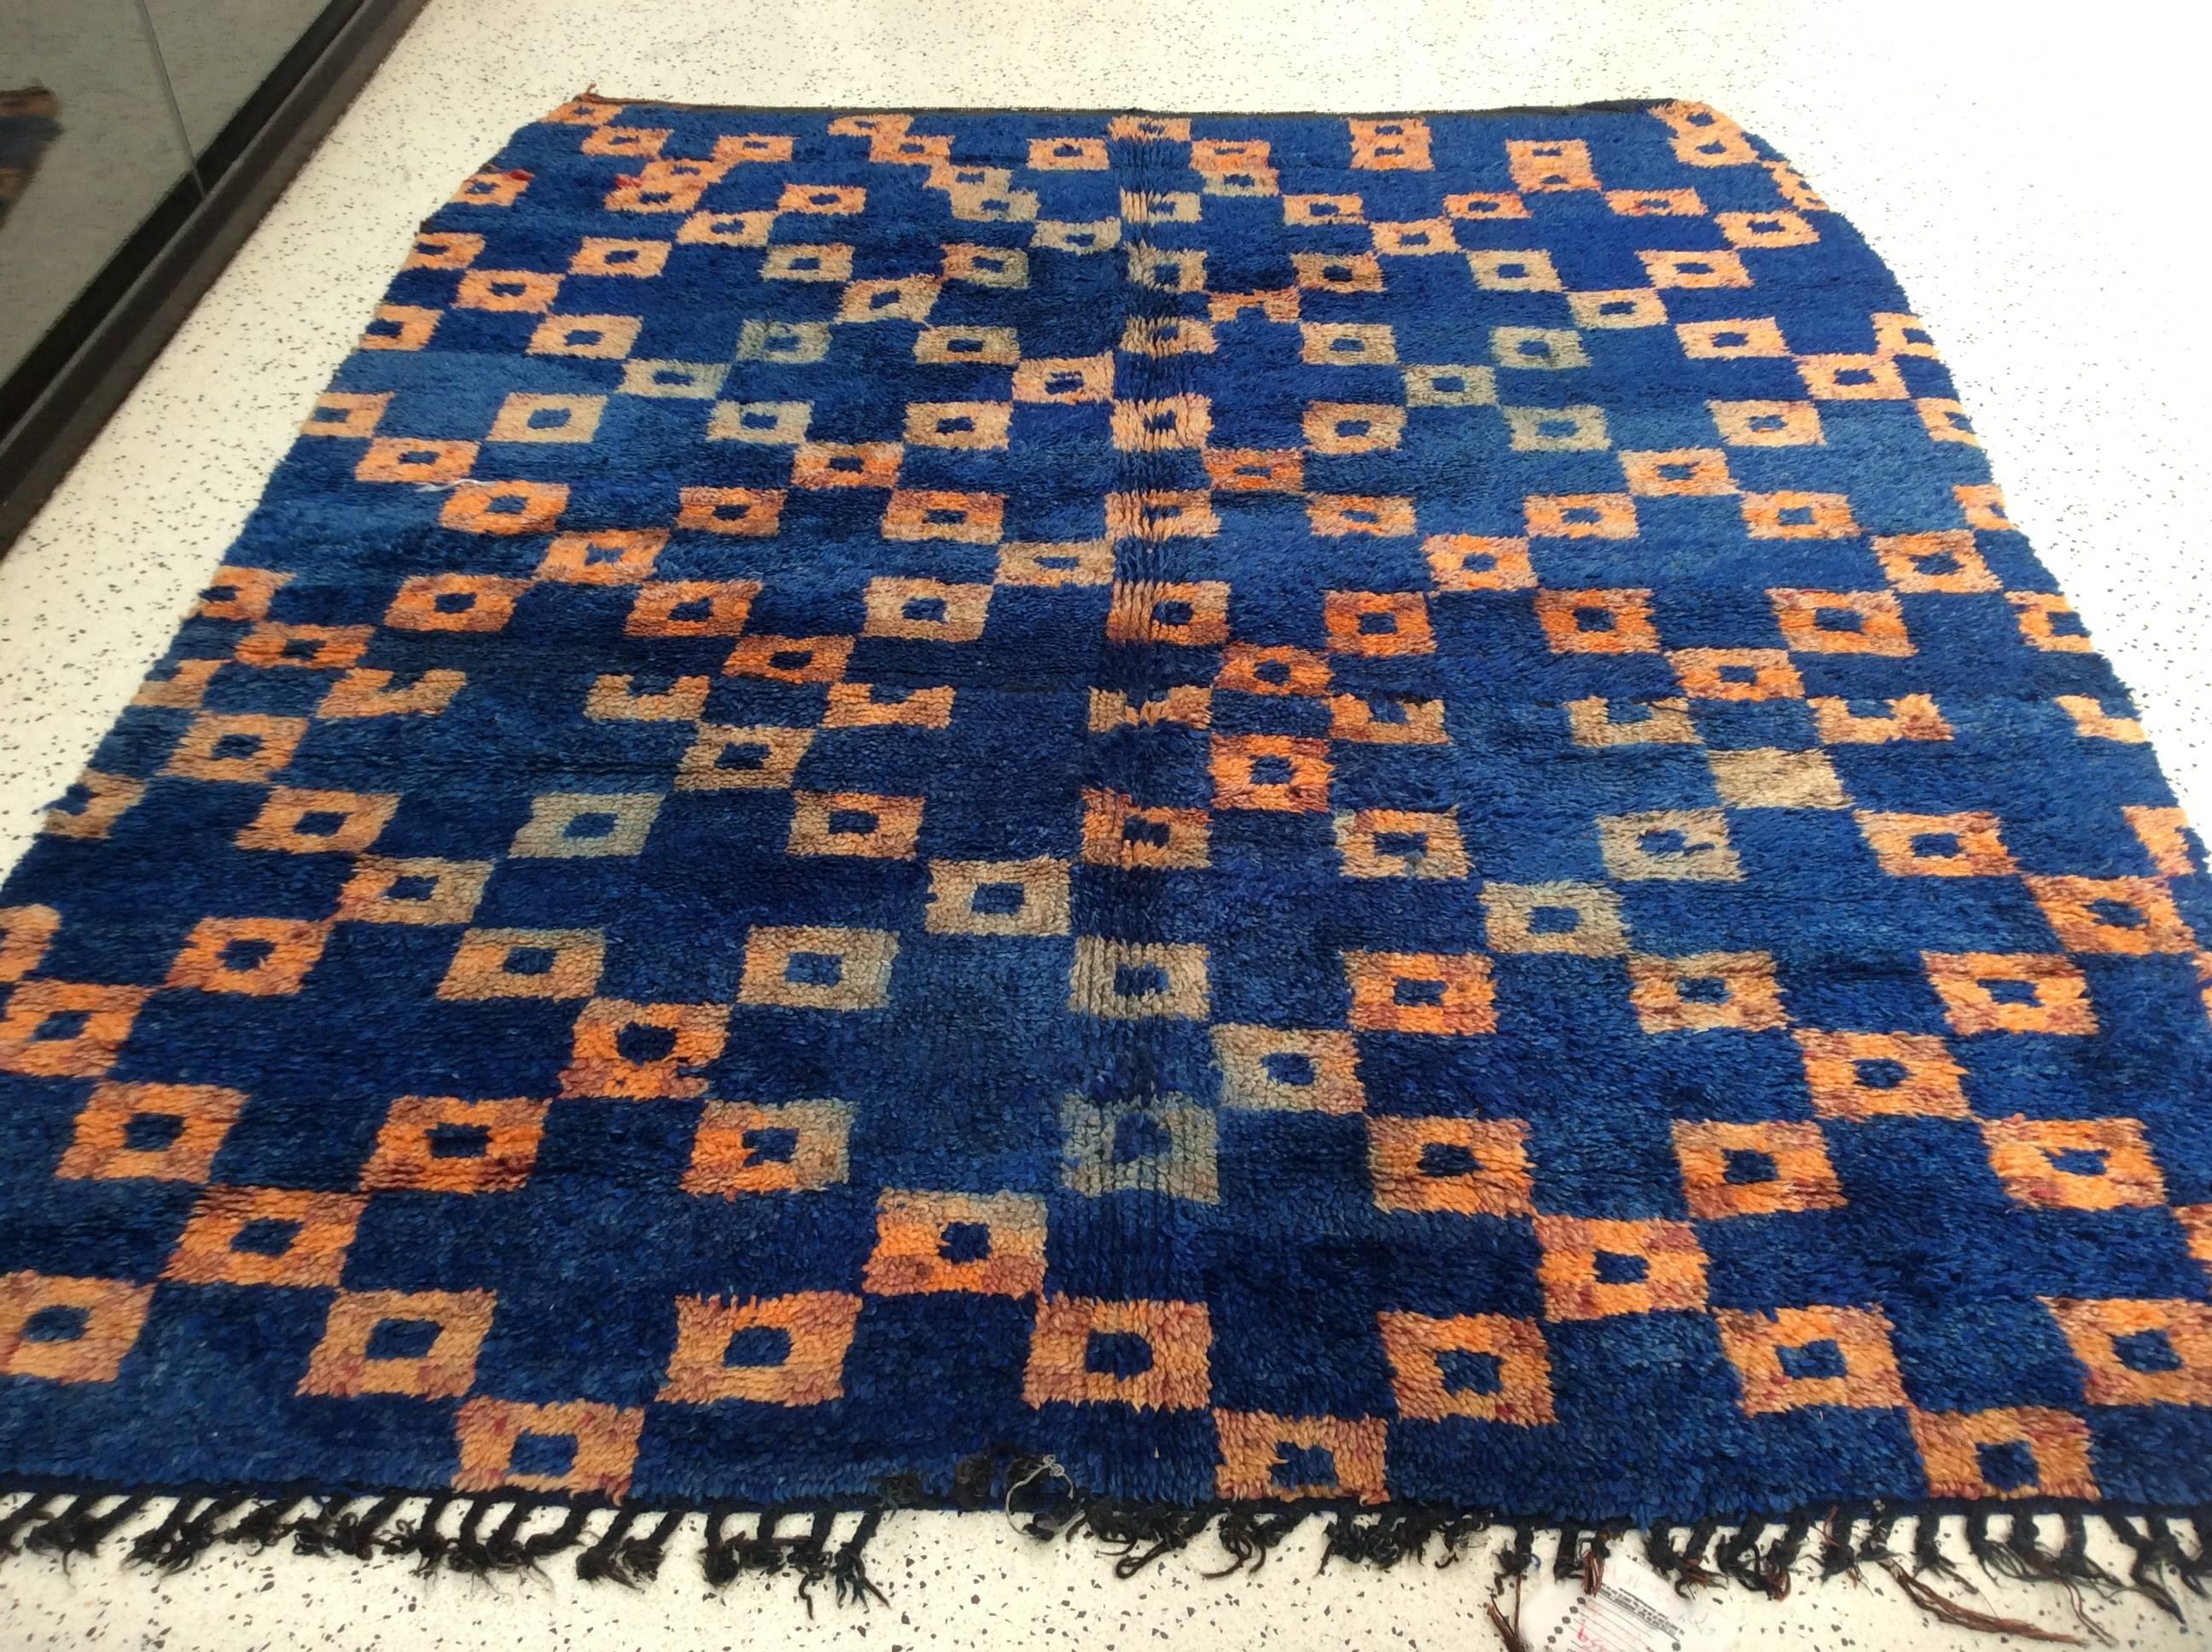 Blue Moroccan rug with orange boxes

A weaving technique that has been passed down from generations to generations makes Moroccan Berber rug such a fine addition to your collection. It is made of luxurious hand-spun wool by the High Atlas tribe; no